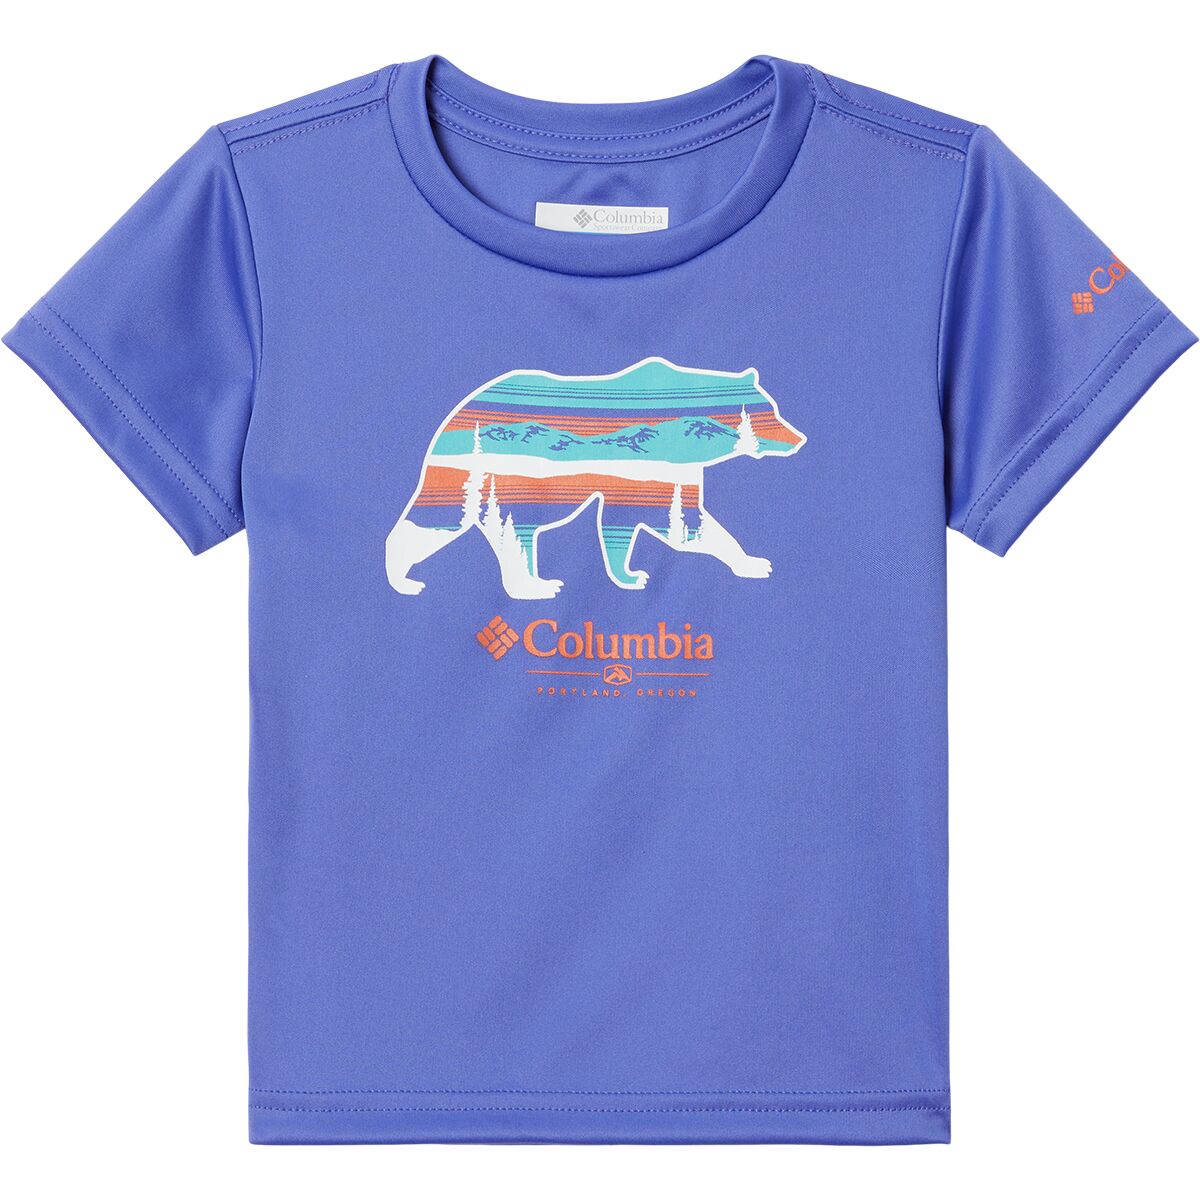 Columbia Grizzly Ridge Short-Sleeve Graphic Shirt - Toddler Boys'